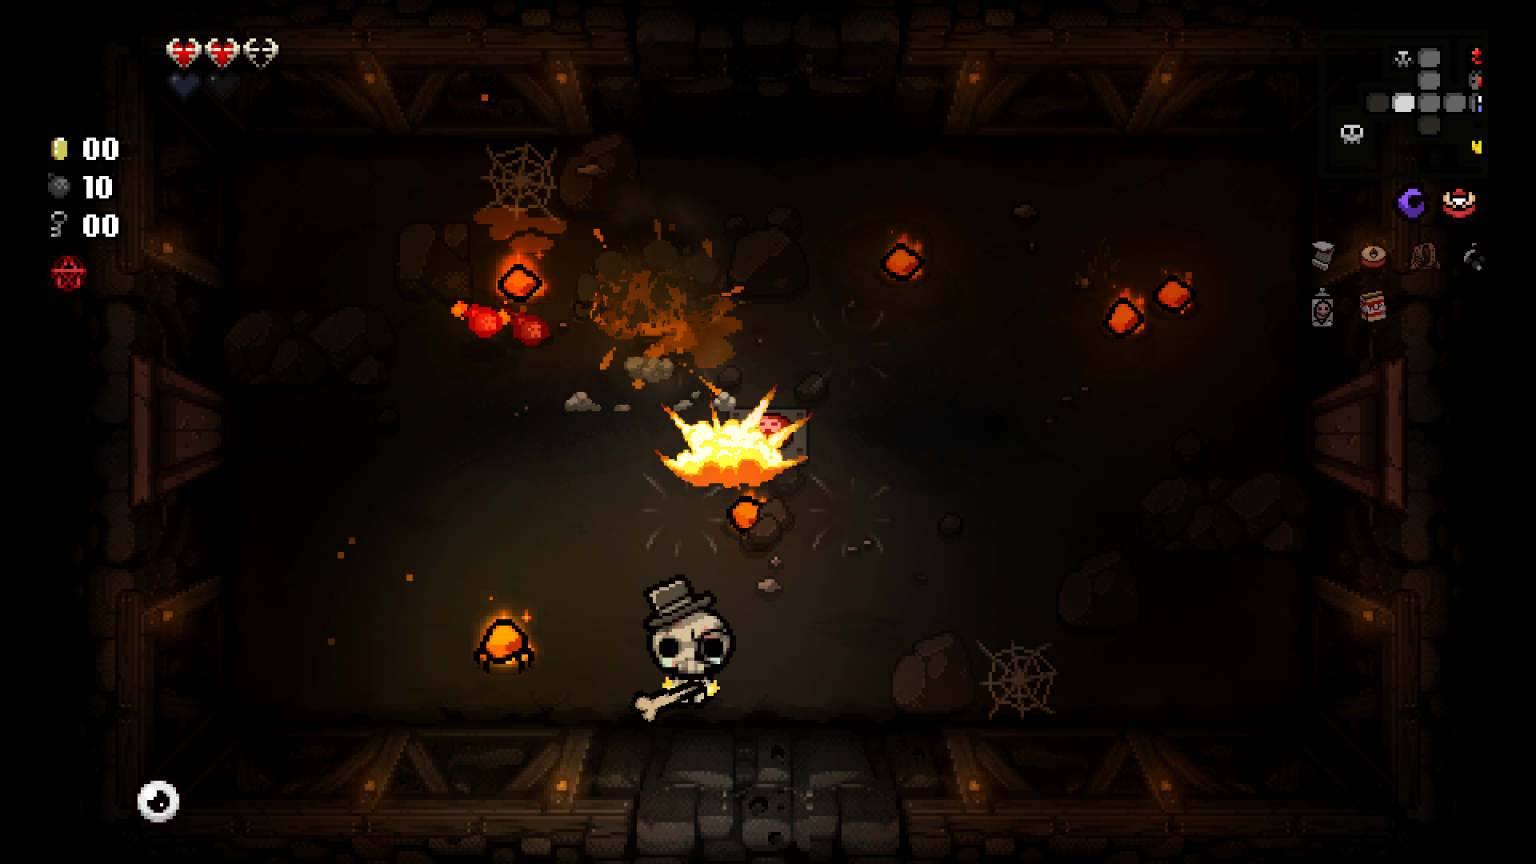 The Binding of Isaac: Repentance for mac instal free